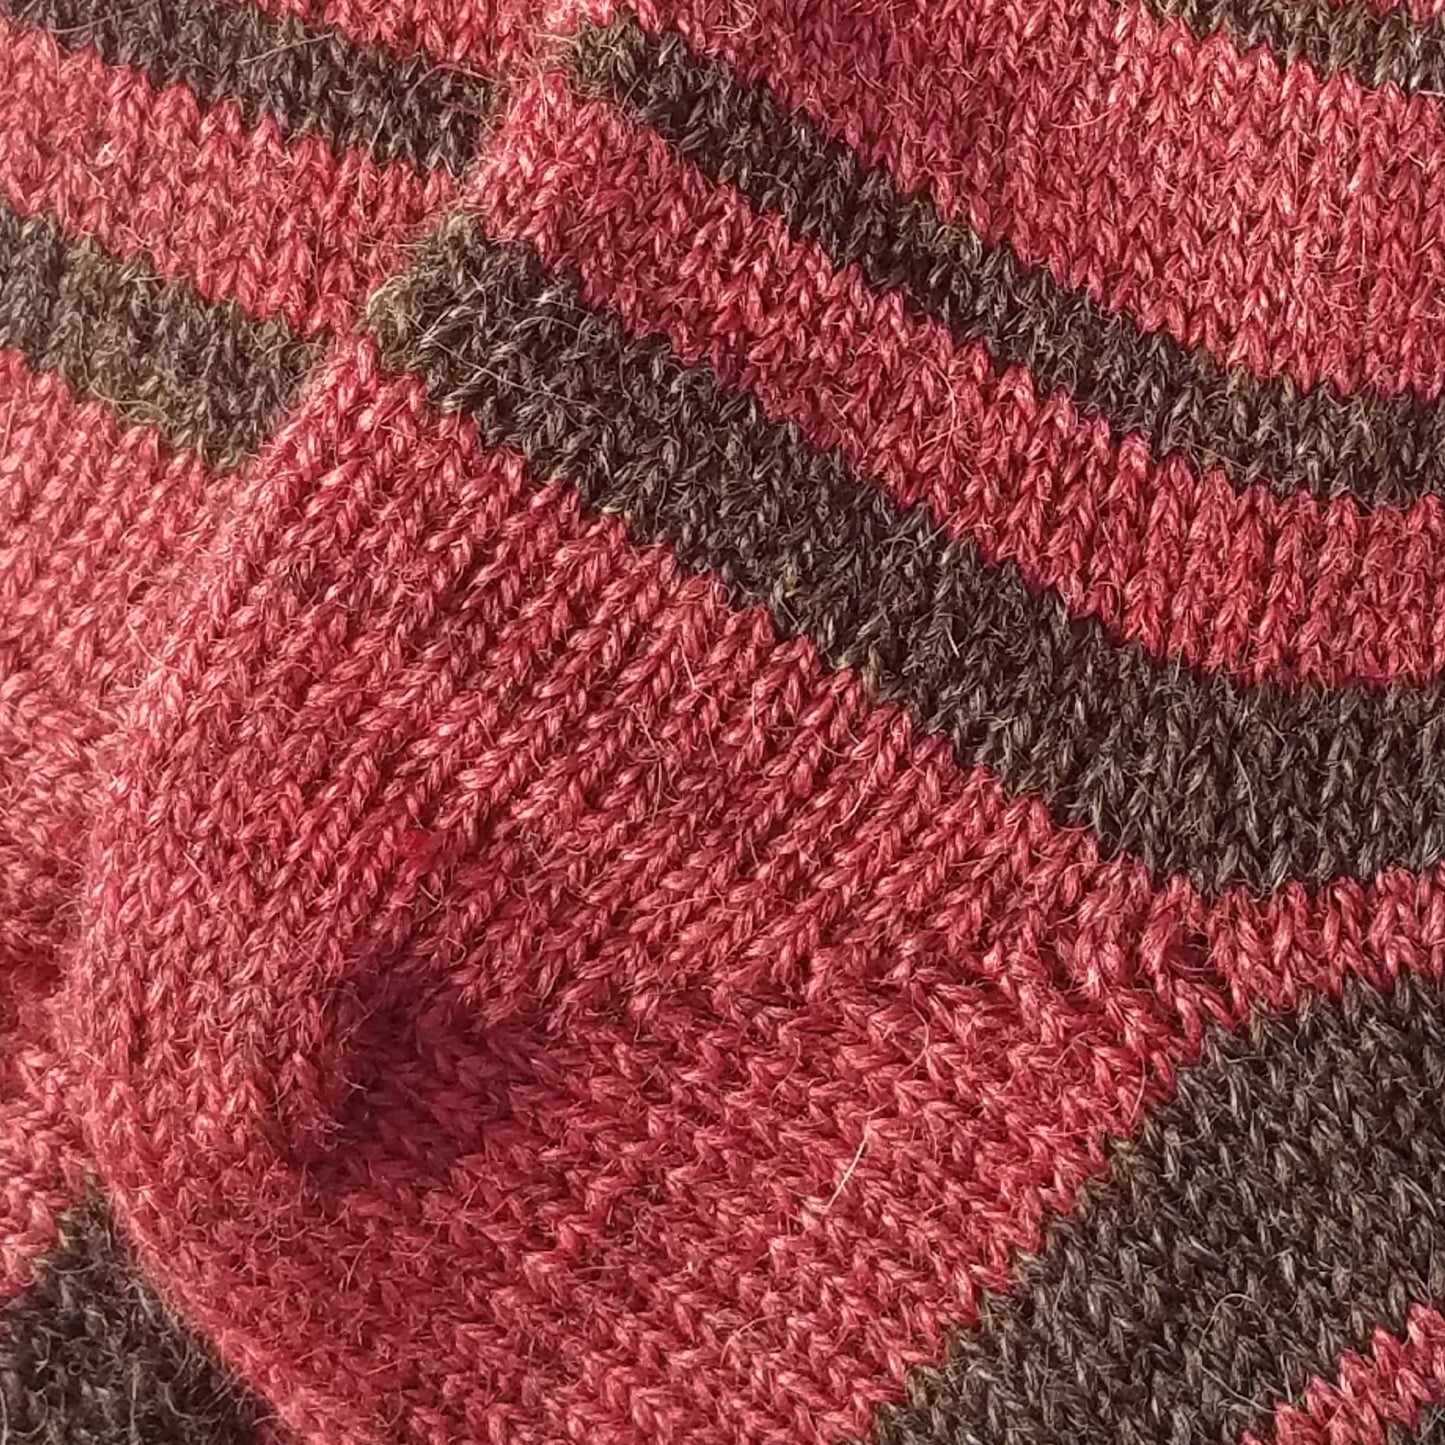 United States, Kathleen Oliver / Sweet Tree Hill Farm, Shepherd’s Socks: Ombre Stripes Duo with Red